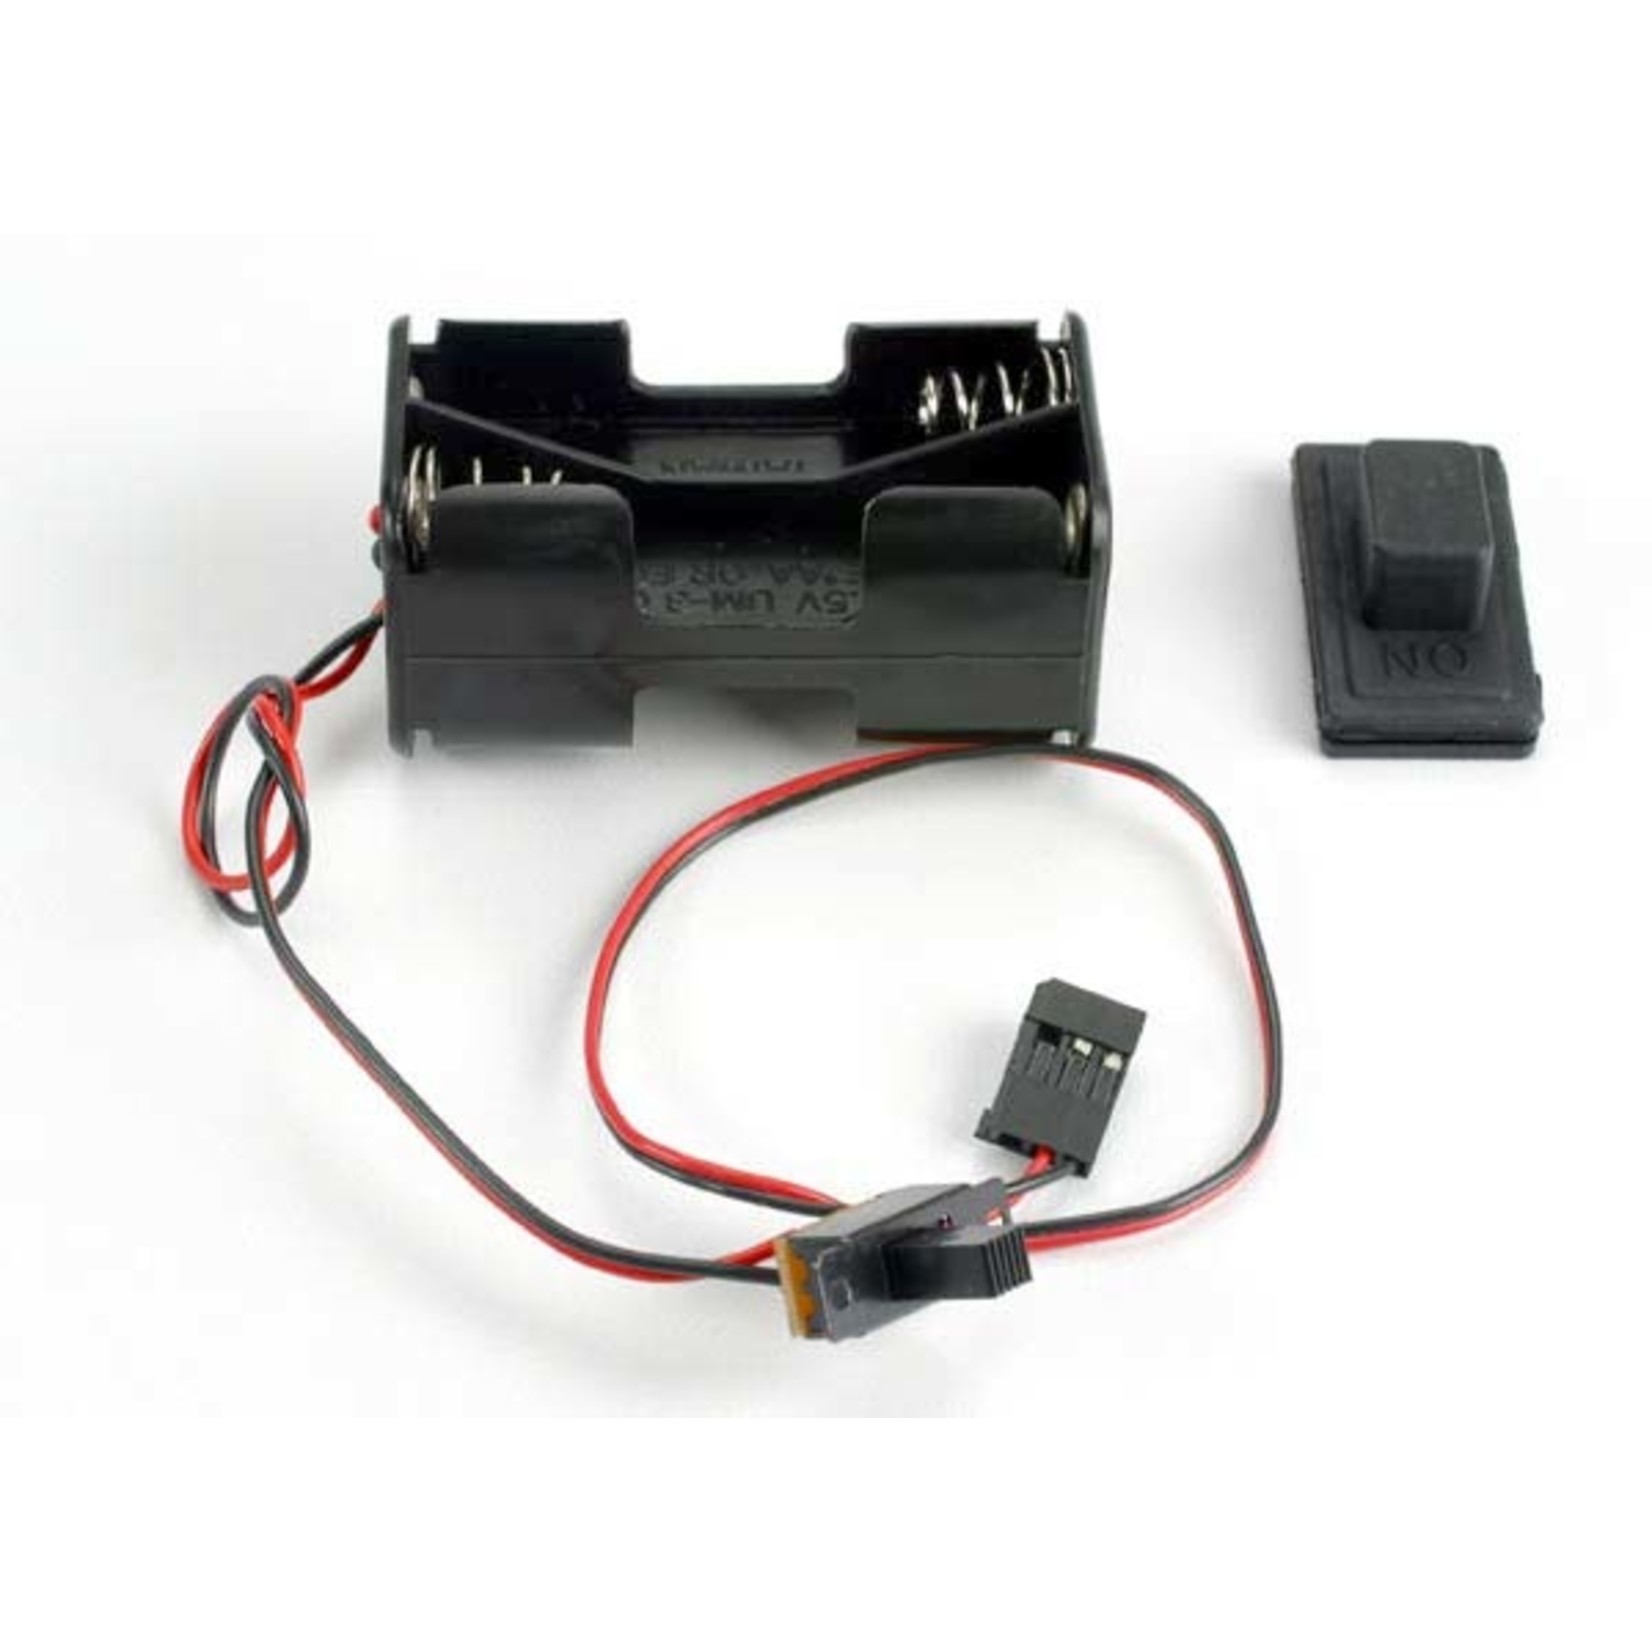 Traxxas 1523 - Battery holder with on/off switch/ rubber on/off switch cover